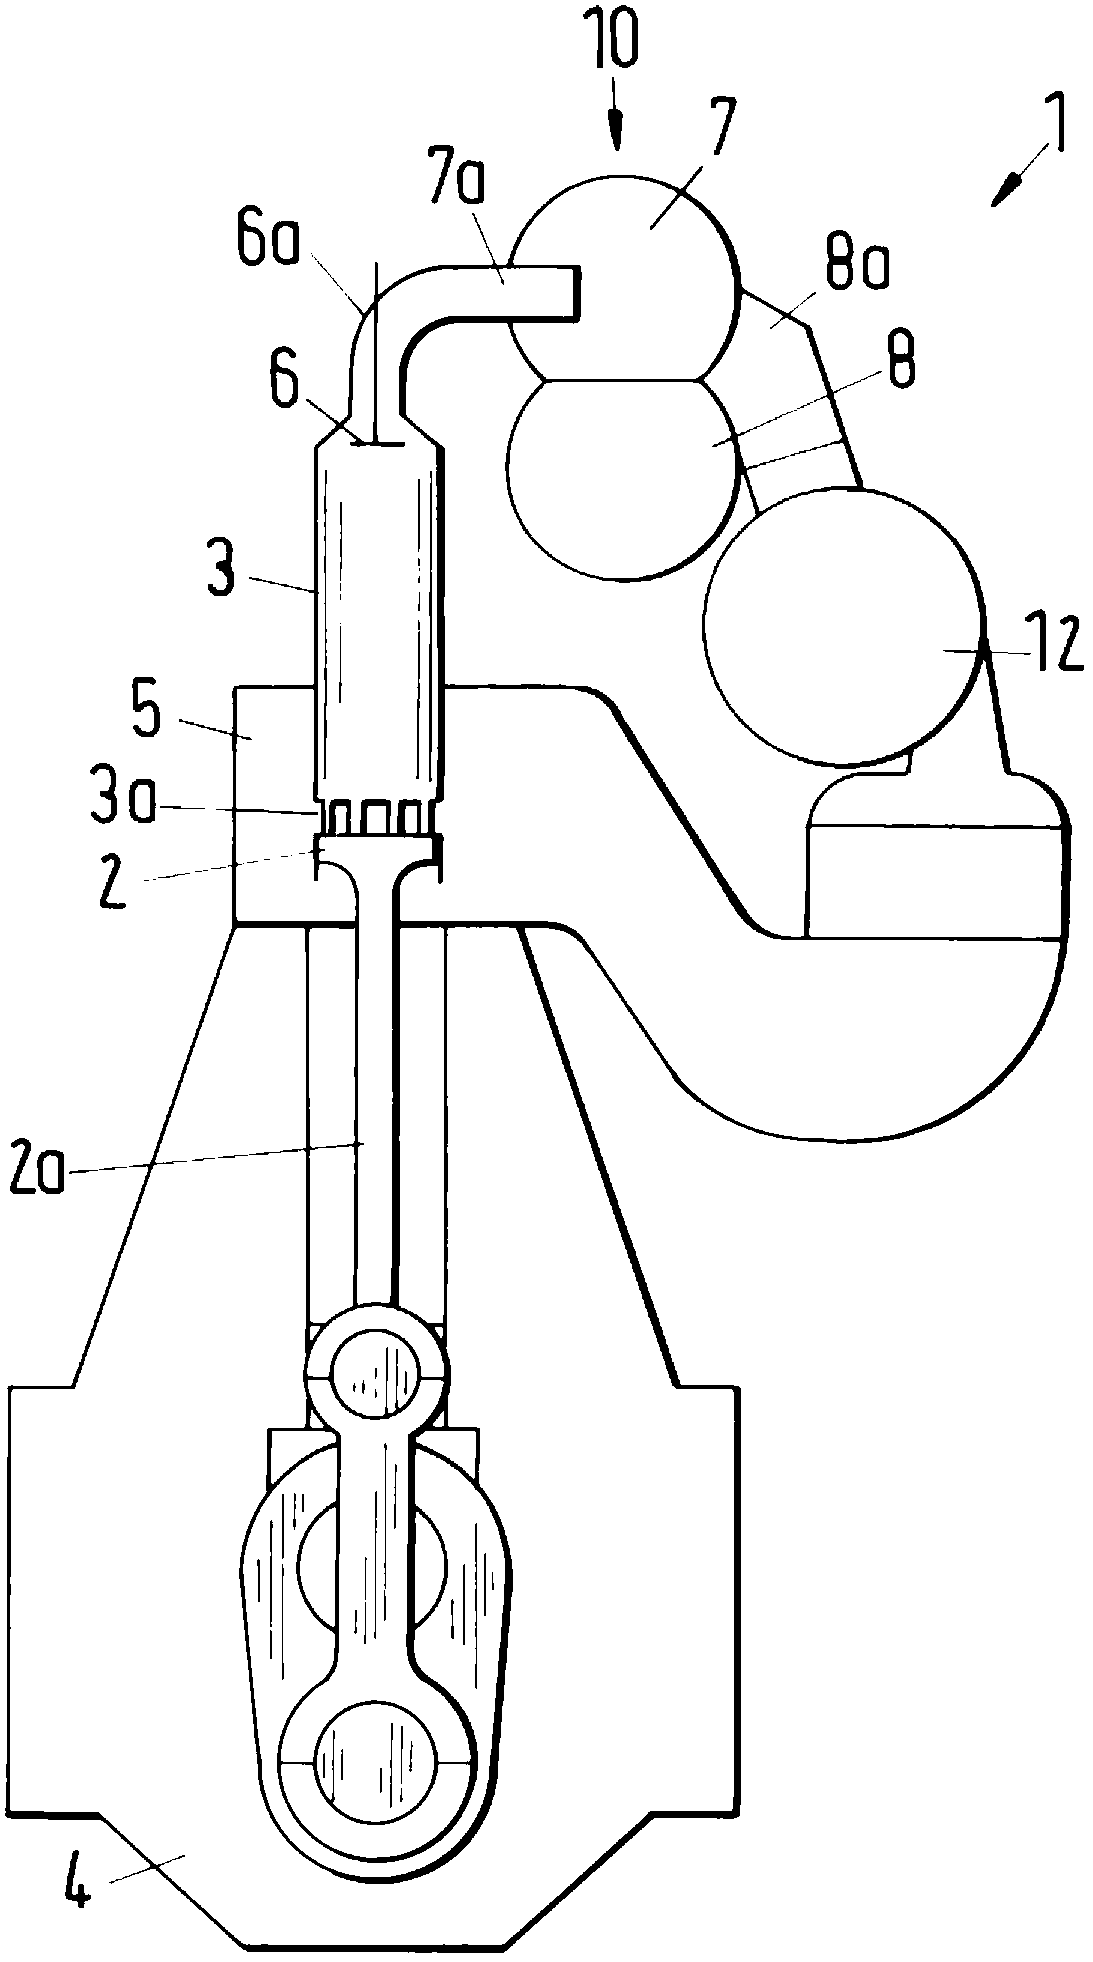 Device and method for treating waste gas